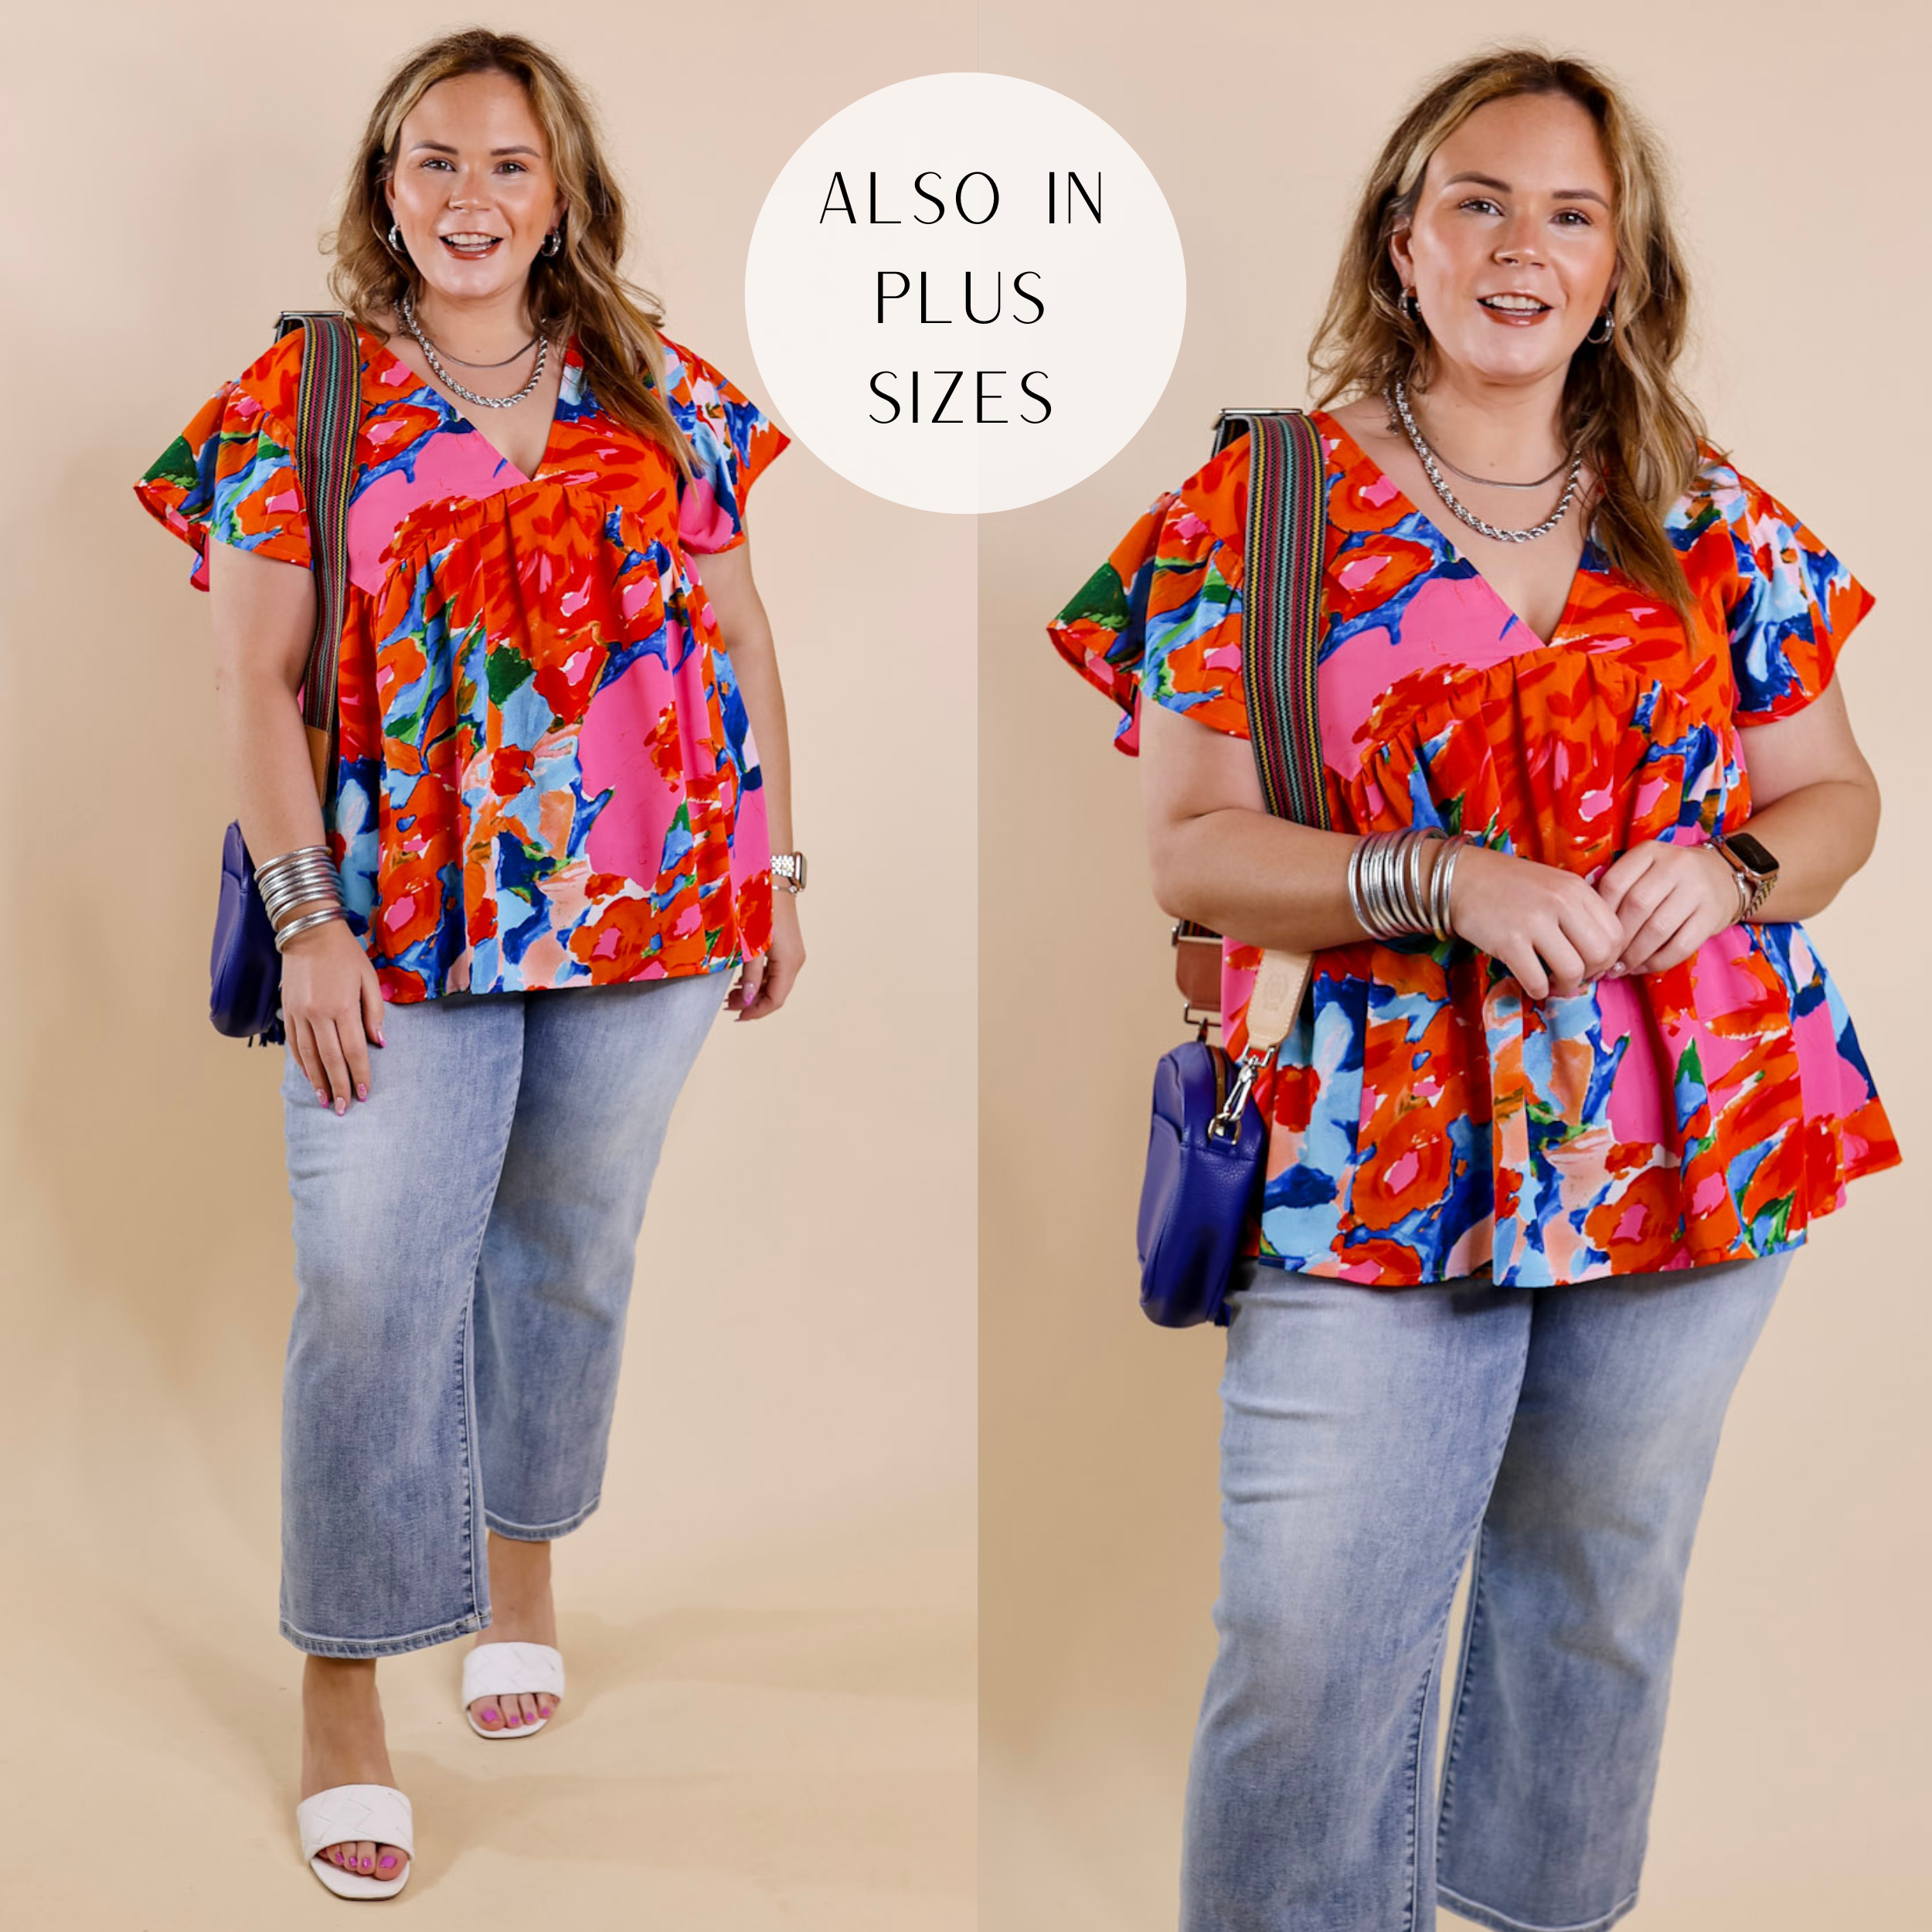 Model is wearing an orange mix floral top with a babydoll hem and deep v neckline. Model has it paired with cropped jeans, white heels, gold jewelry, and a blue purse.